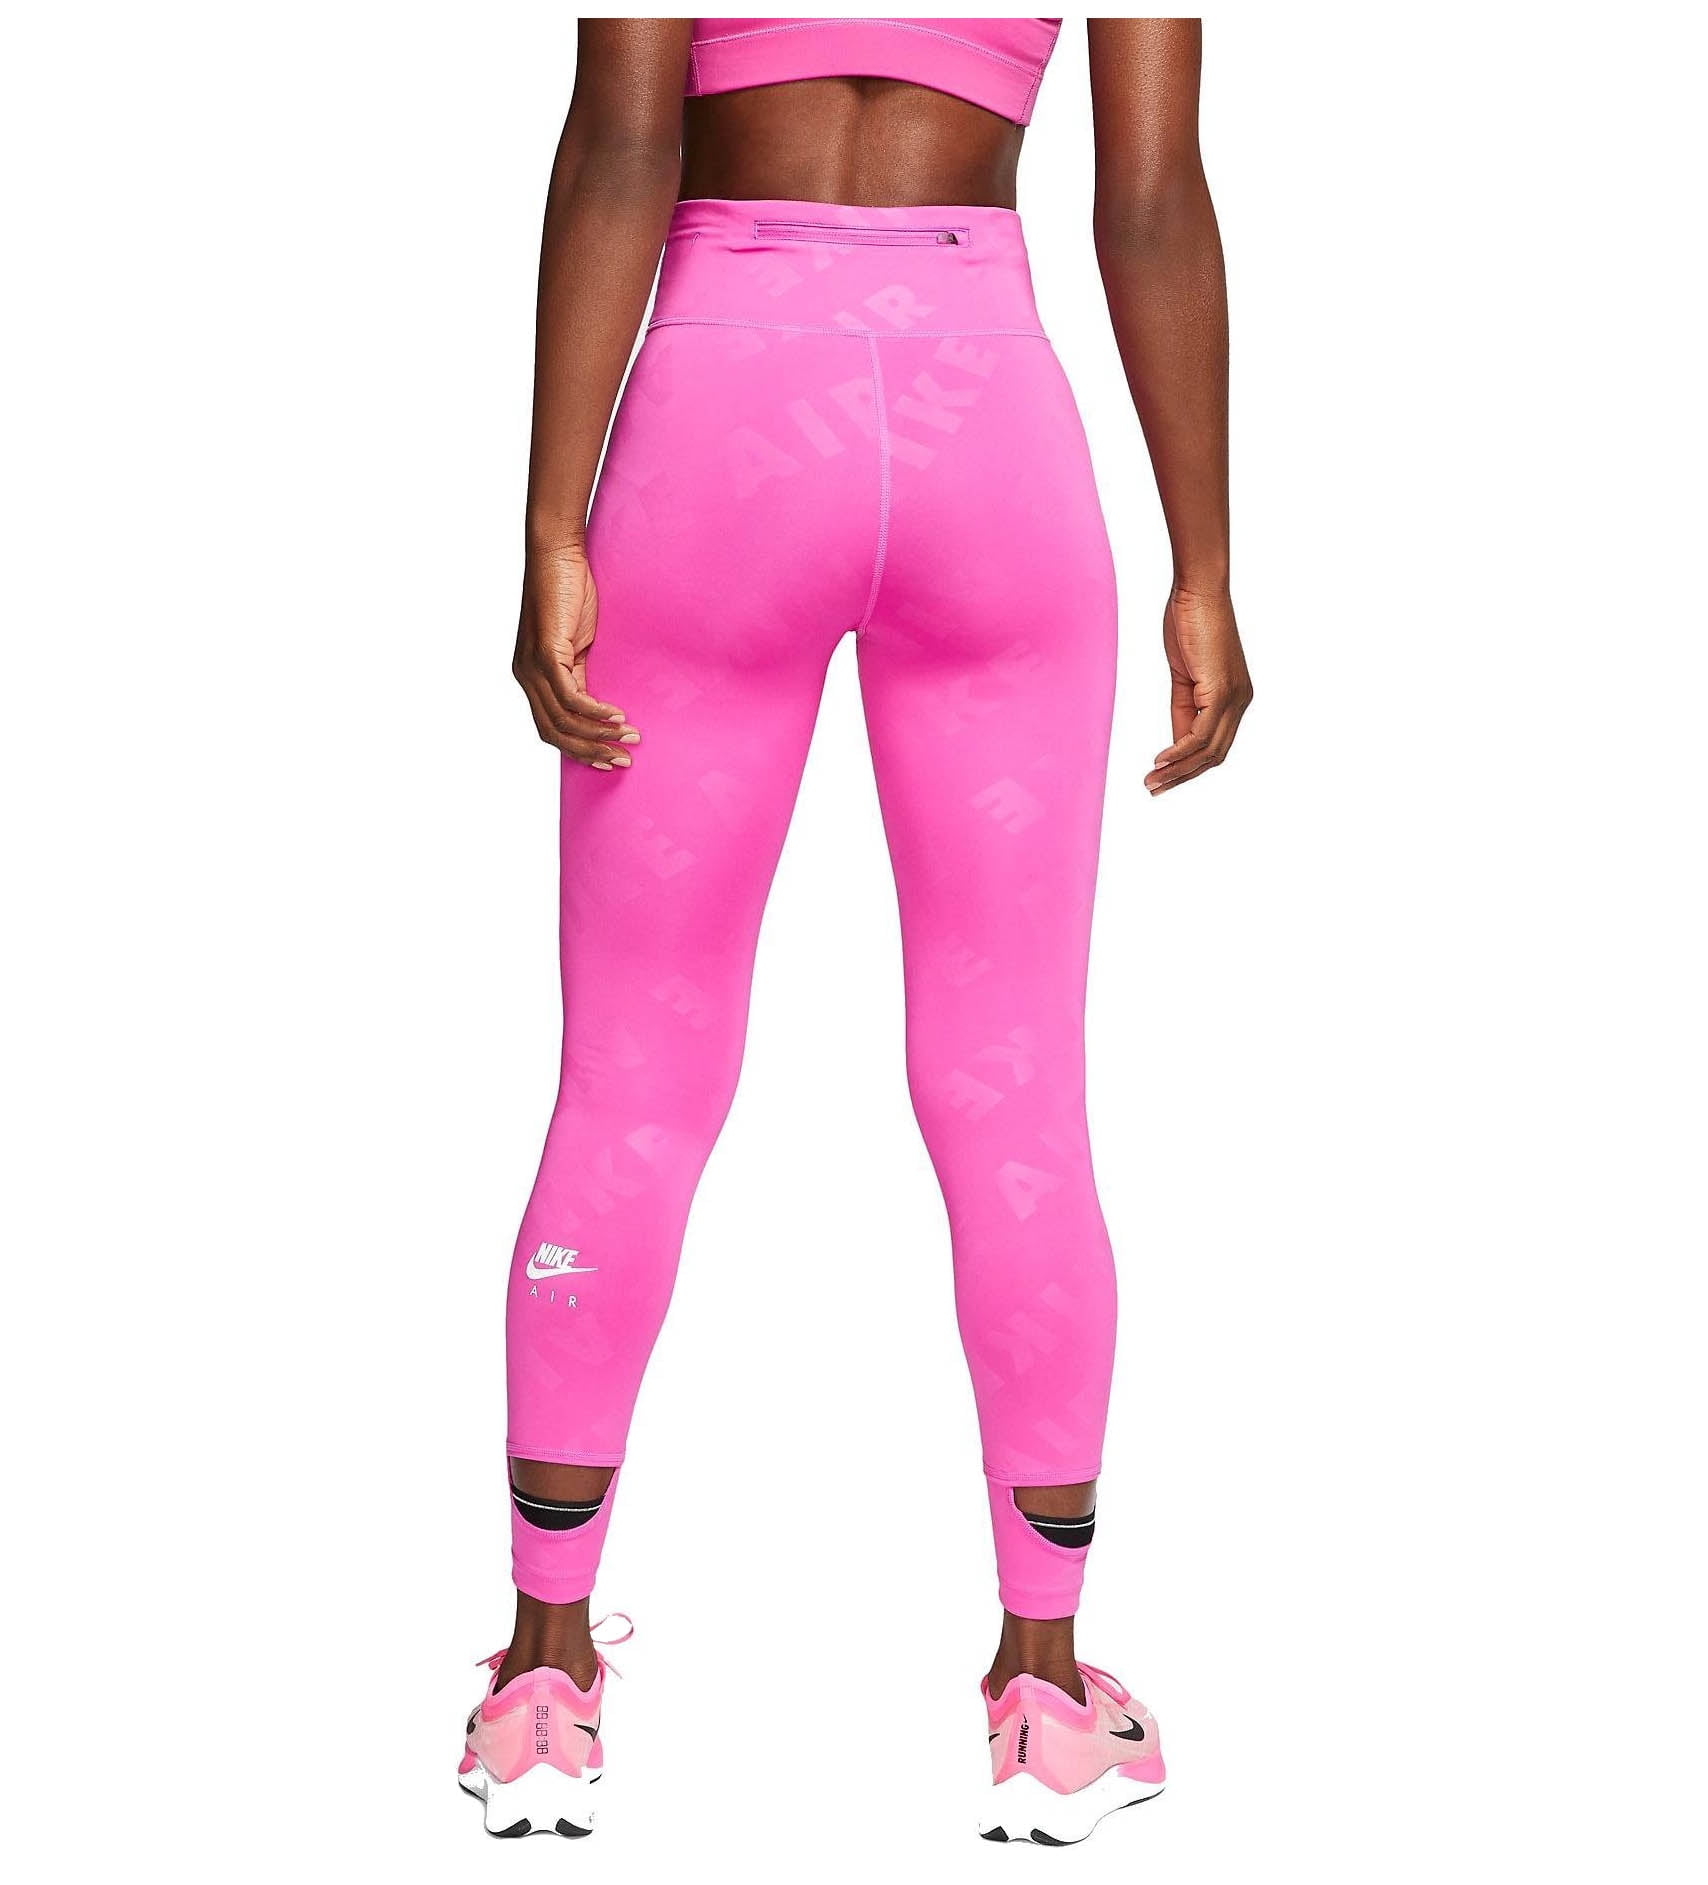 Women's Nike 7/8 Training Lazer Cut Tights M Pink Tight Gym Running Casual  New